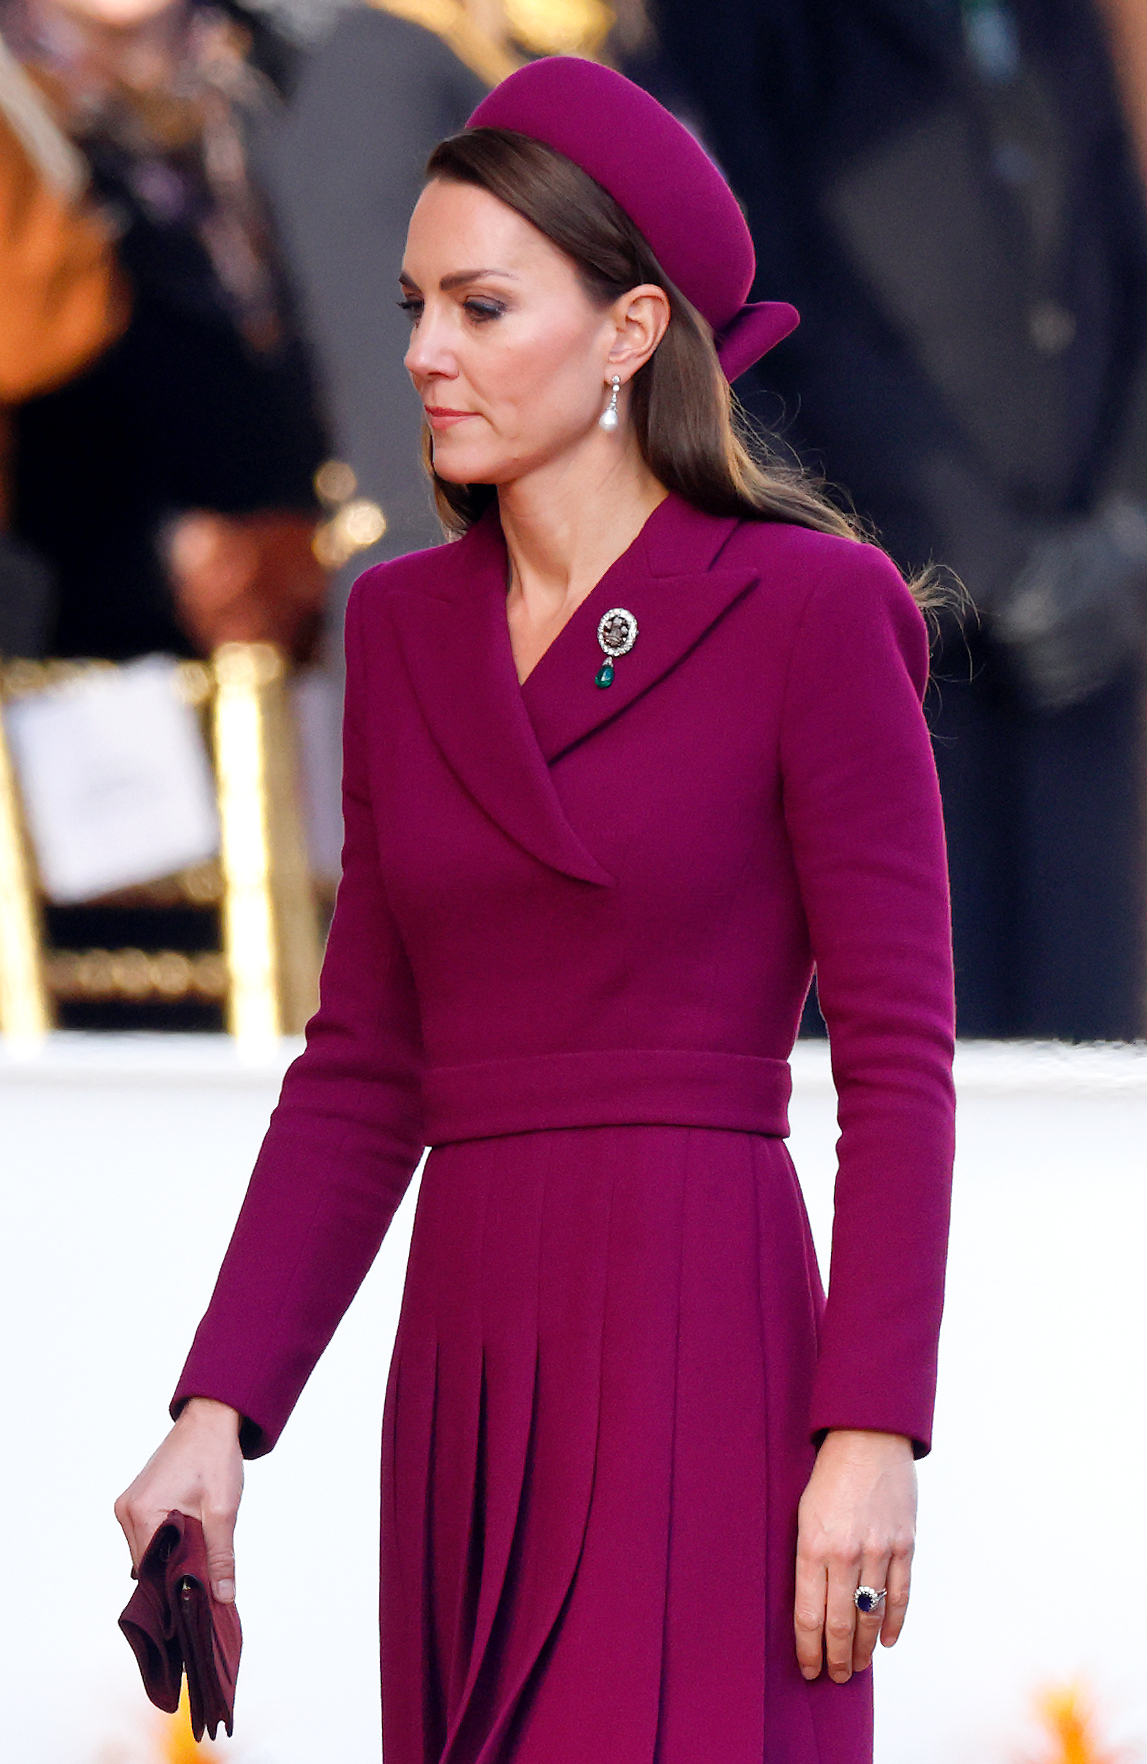 Princess Catherine at the Ceremonial Welcome at Horse Guards Parade for President Cyril Ramaphosa on day 1 of his State Visit to the United Kingdom on November 22, 2022 in London, England | Source: Getty Images